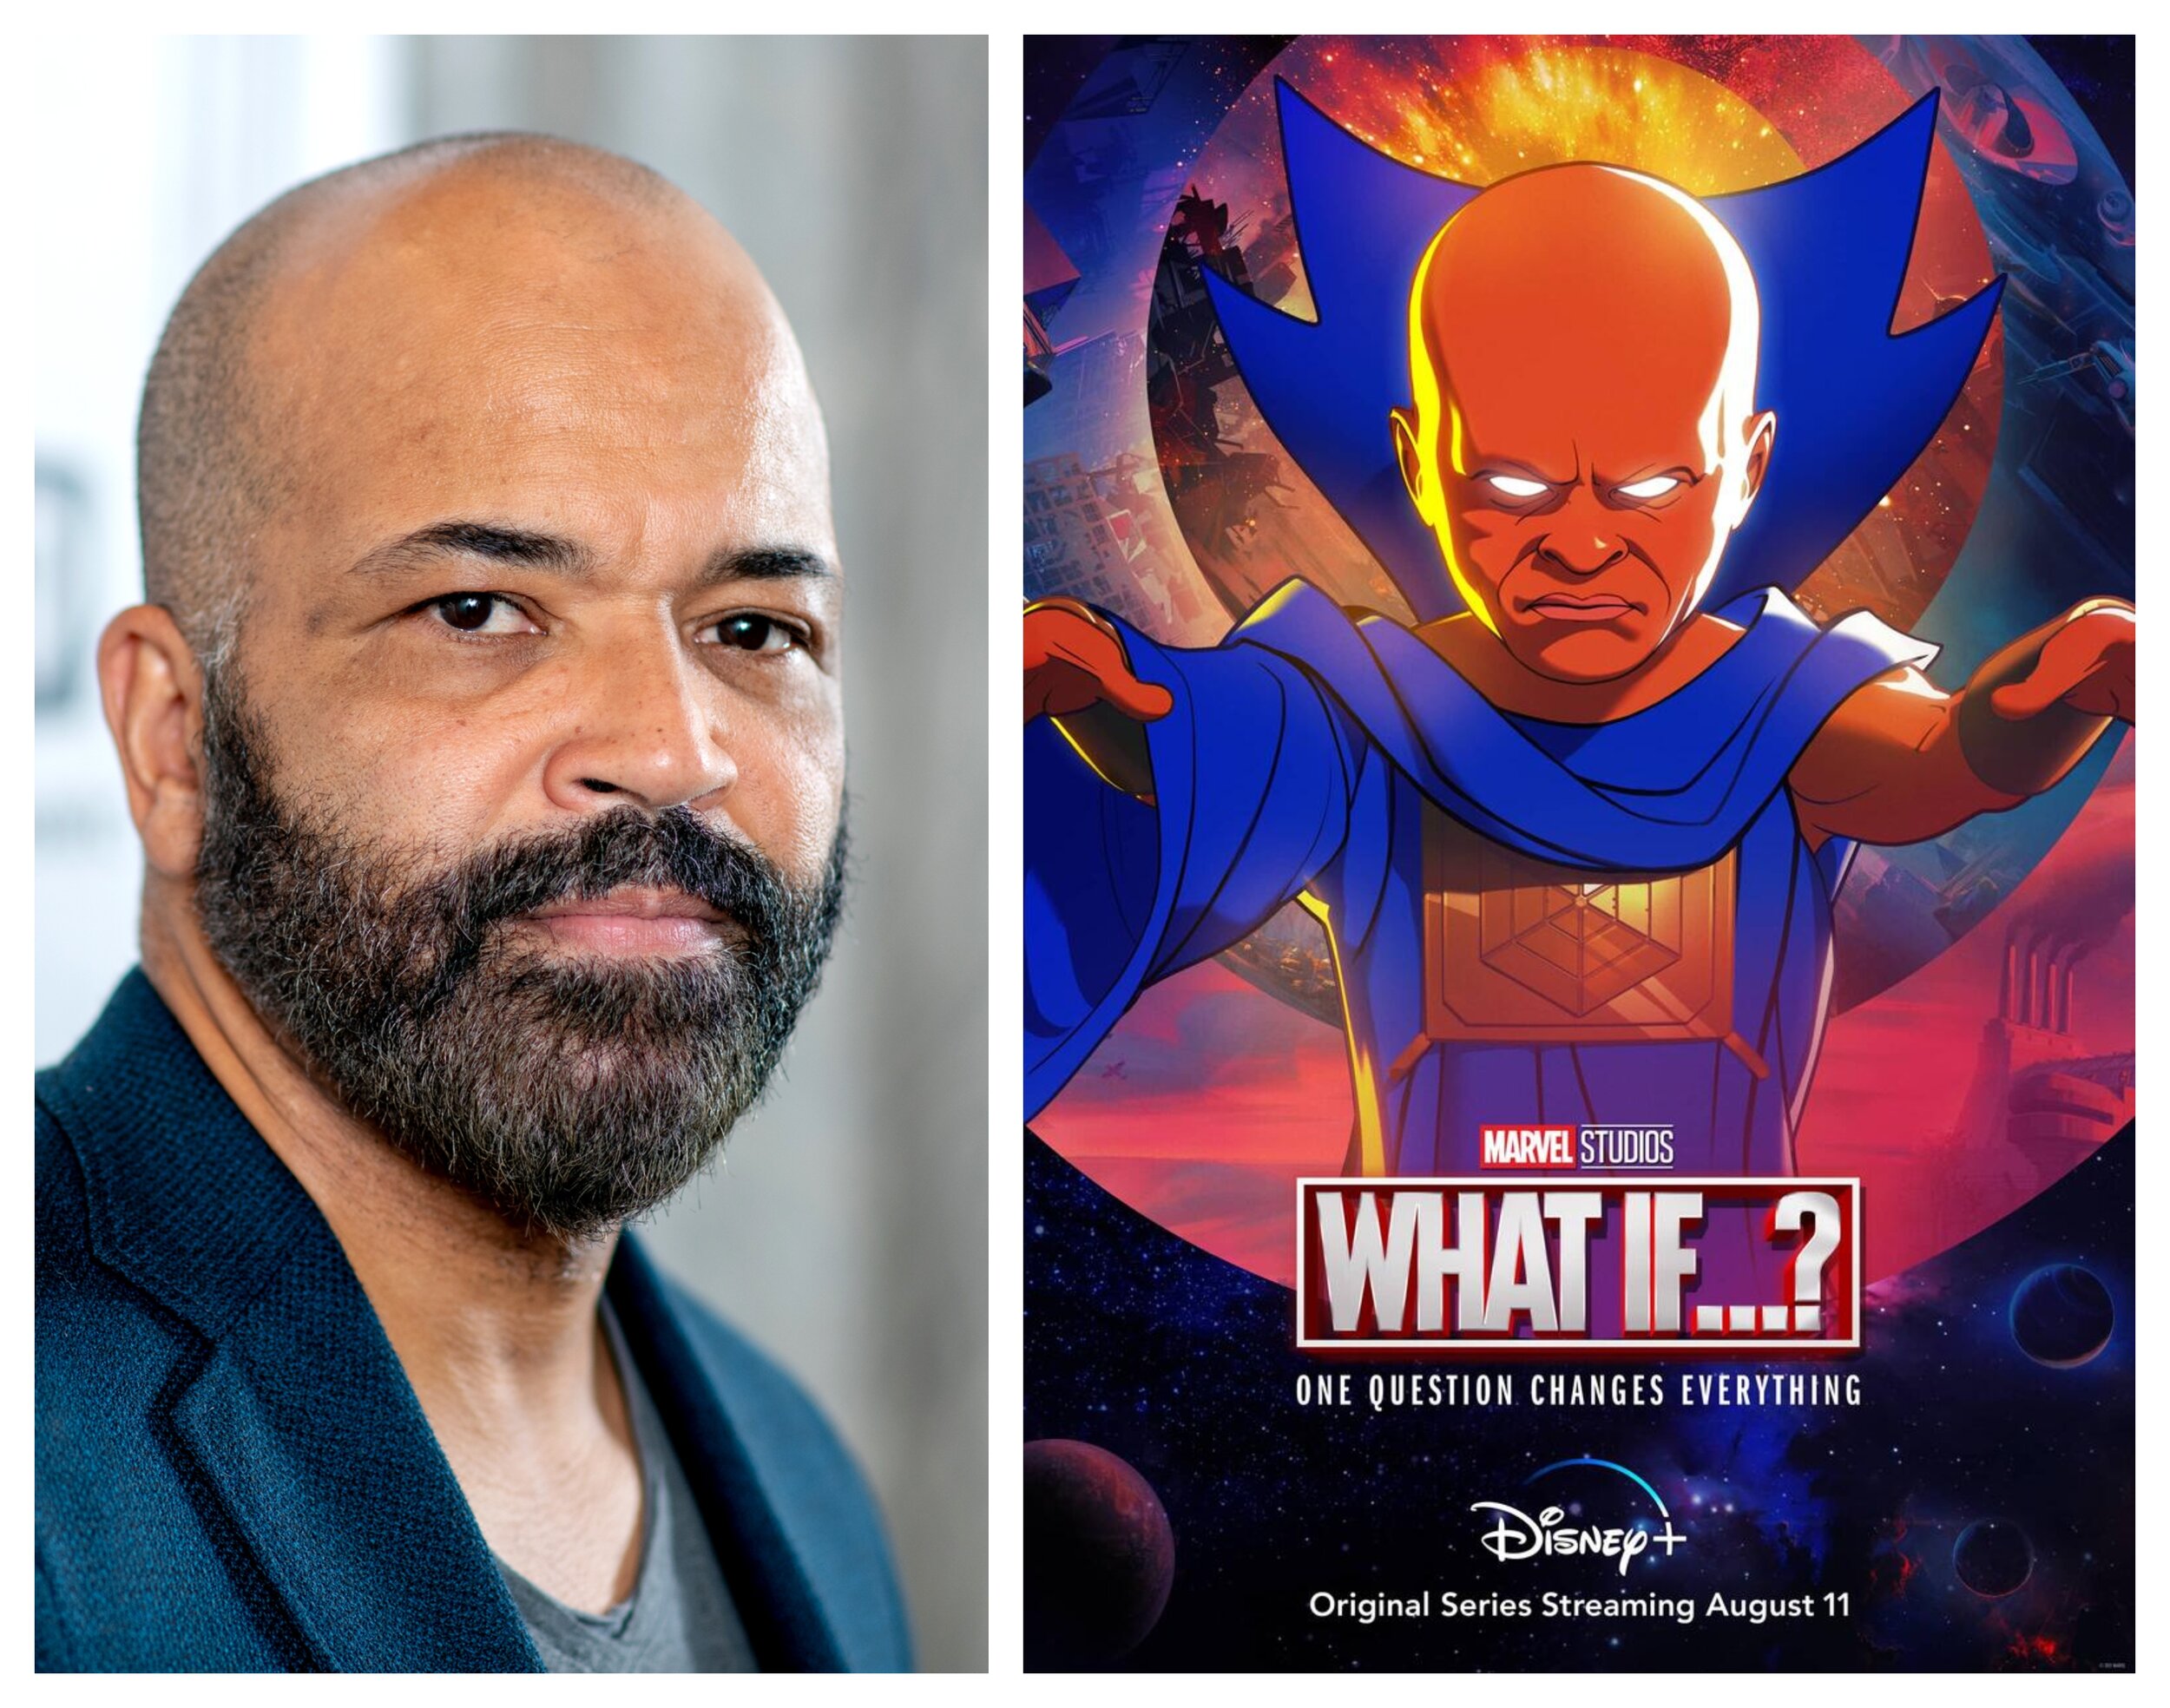 Jeffrey Wright on Portraying Marvel's The Watcher in Live-Action: We'll  See. (Exclusive)